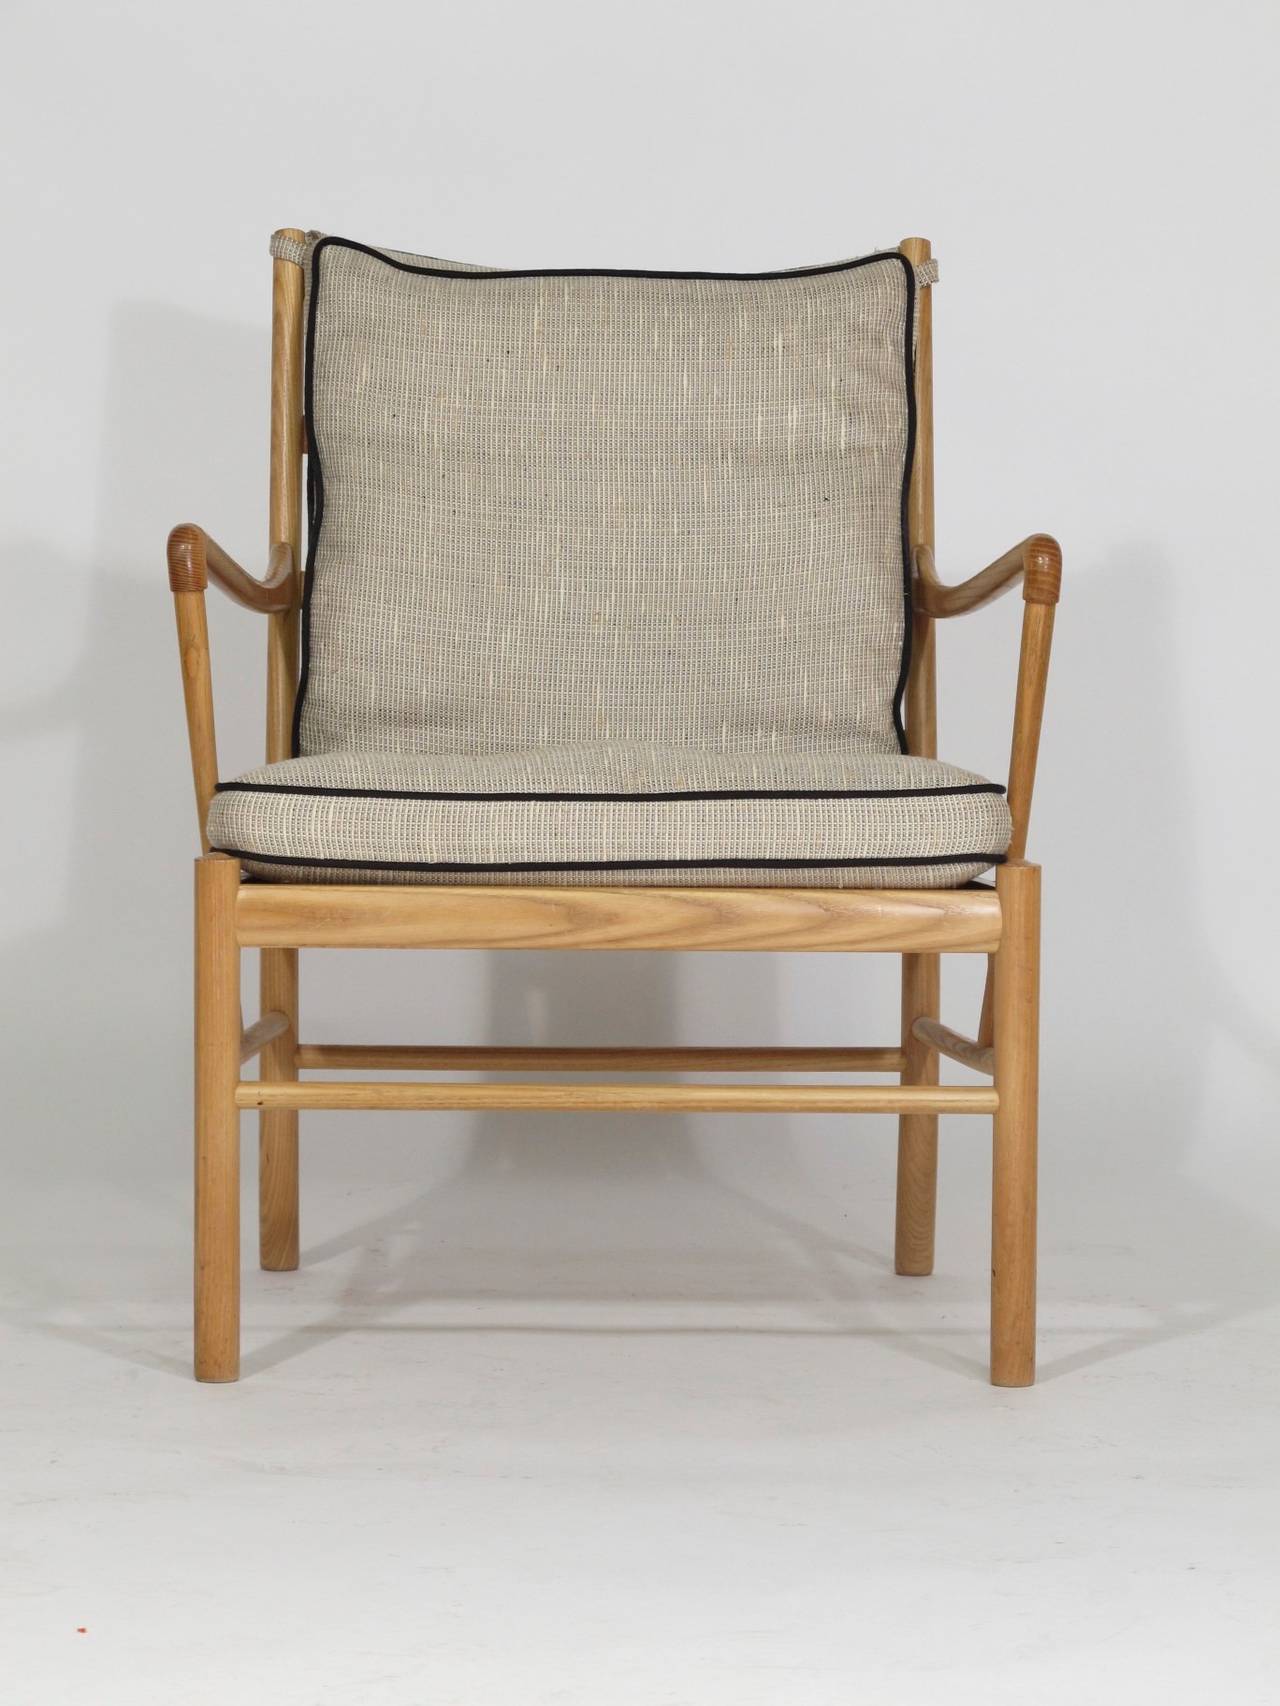 Colonial chair designed by Ole Wanscher for P. Jeppesen, model PJ 149. Solid ash frame with cane seat and original down-filled cushions.